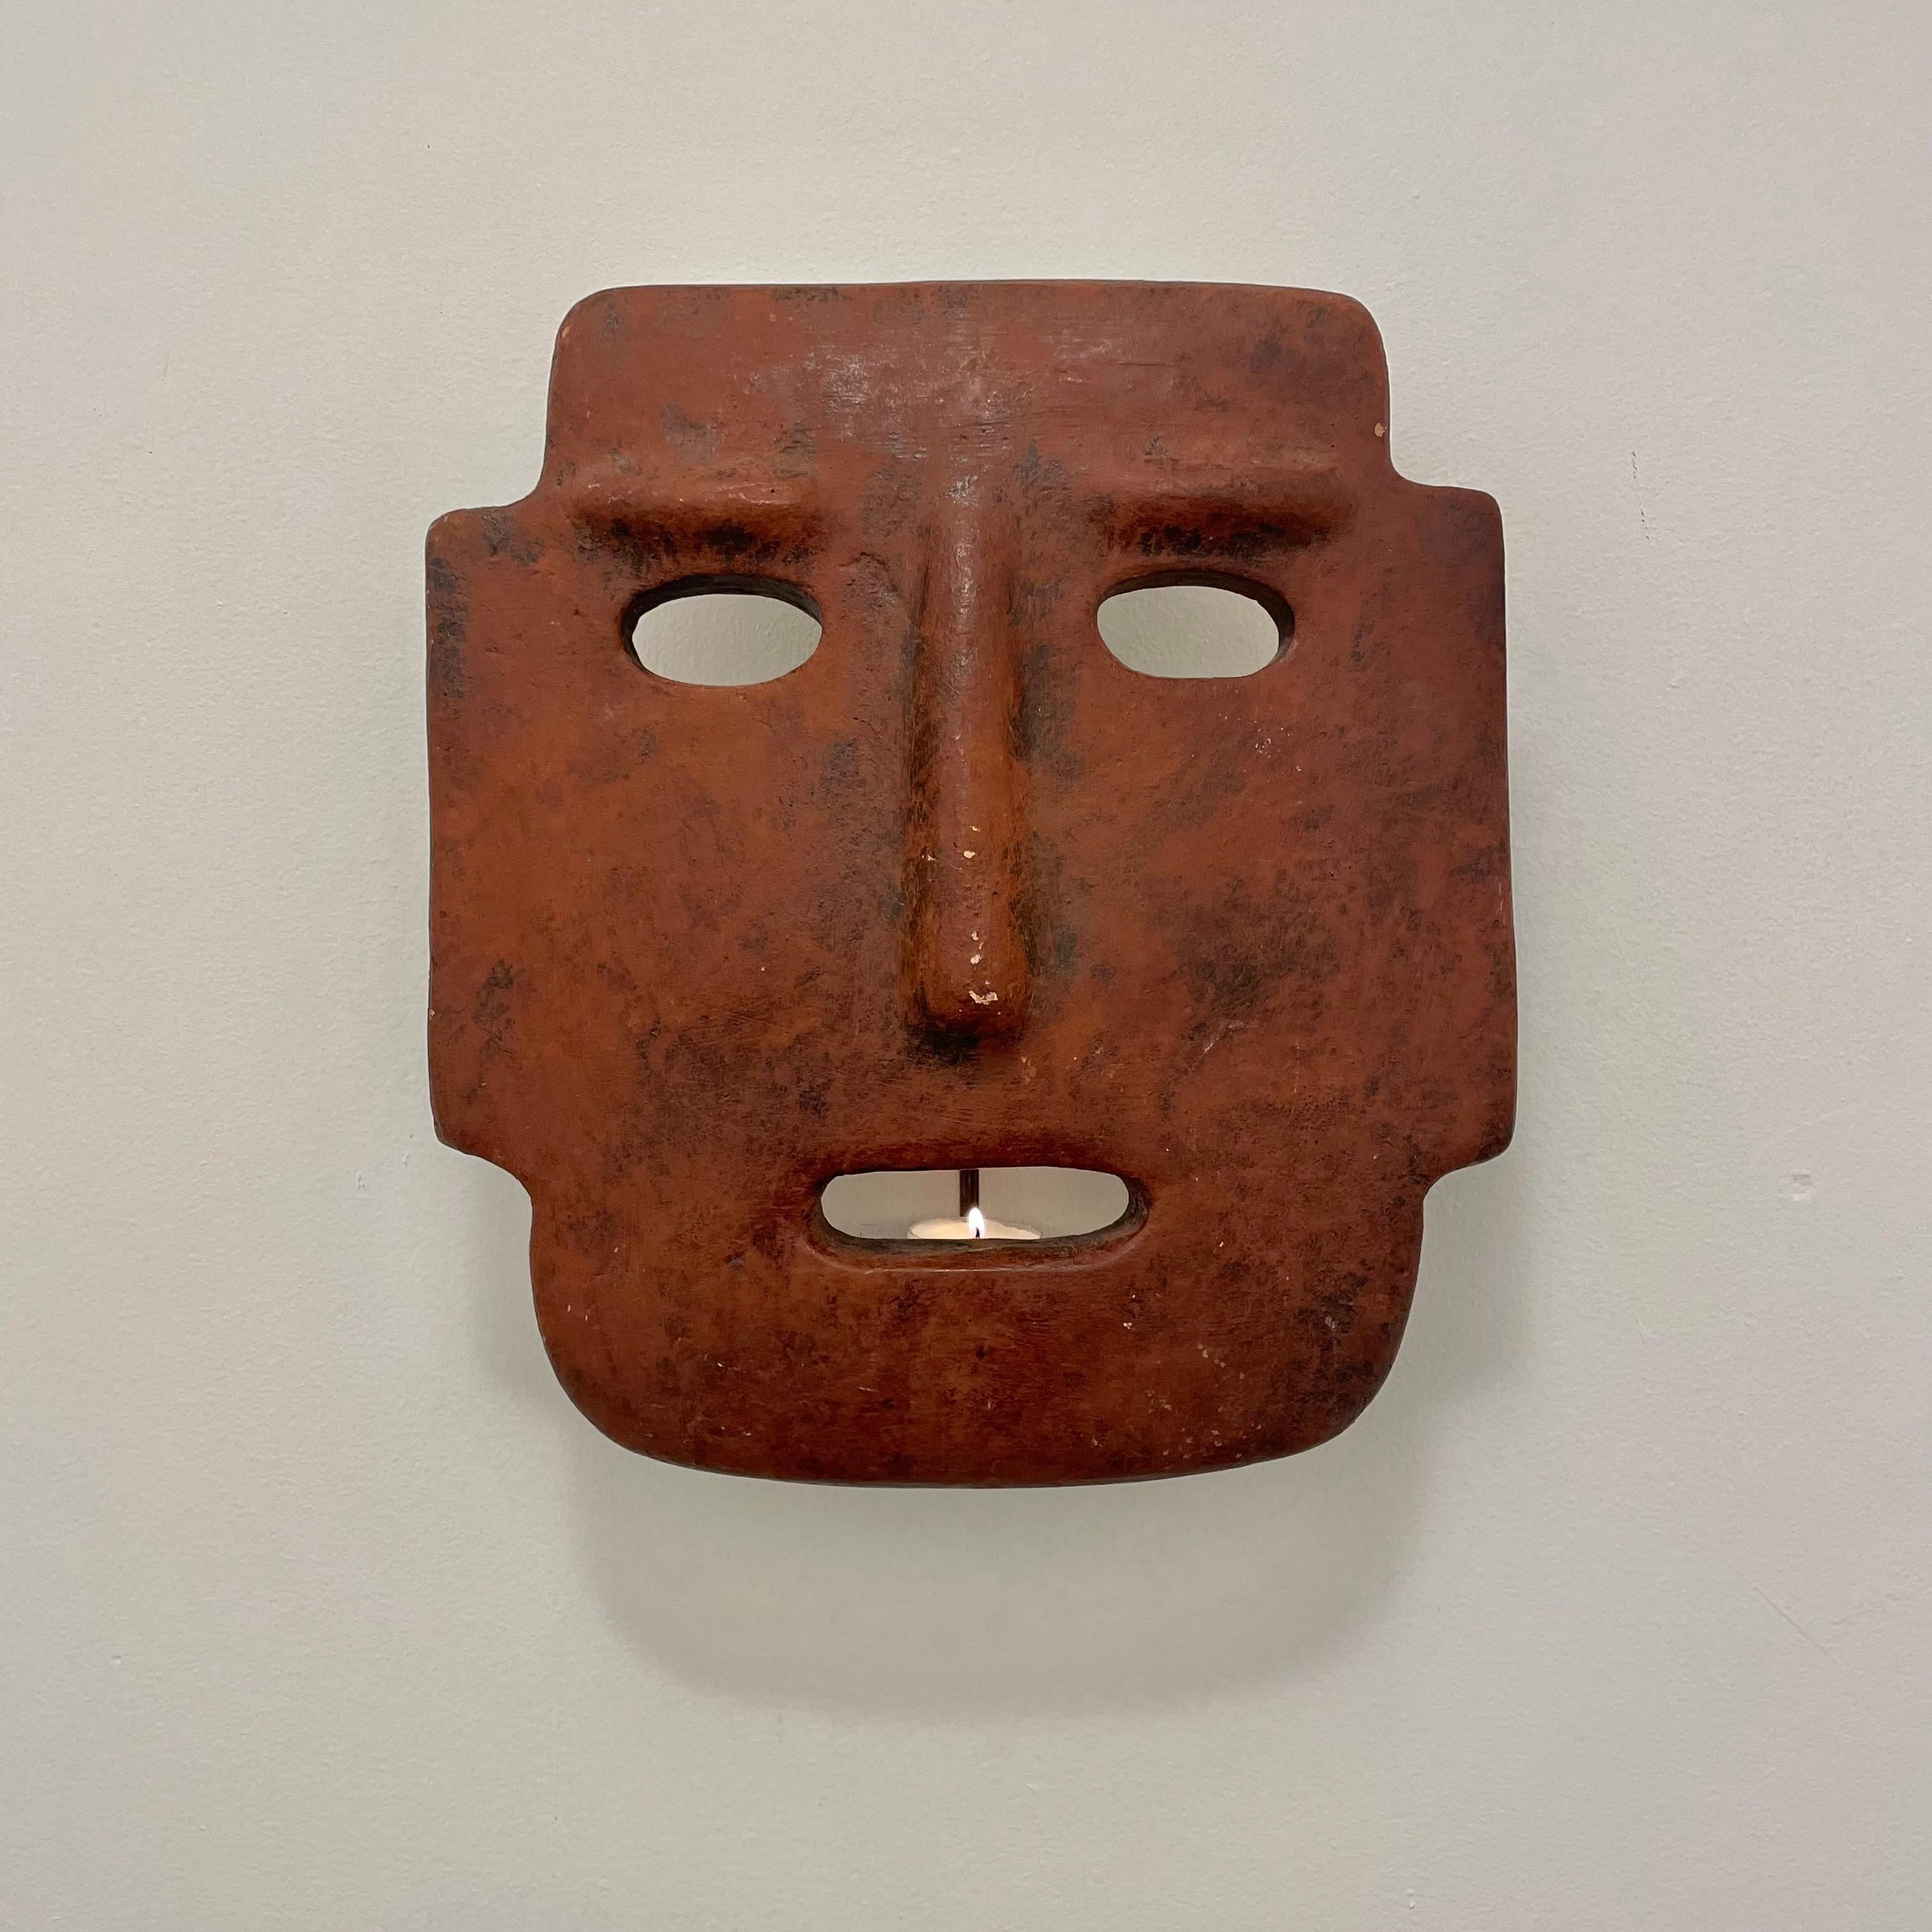 Fantastic sculptural clay mask candle sconce made in Italy. Hand made in an aged adobe color with a place for a single candle inside. Mask has a metal frame which gives the piece a nice depth from the wall and provides a surface for the candle to